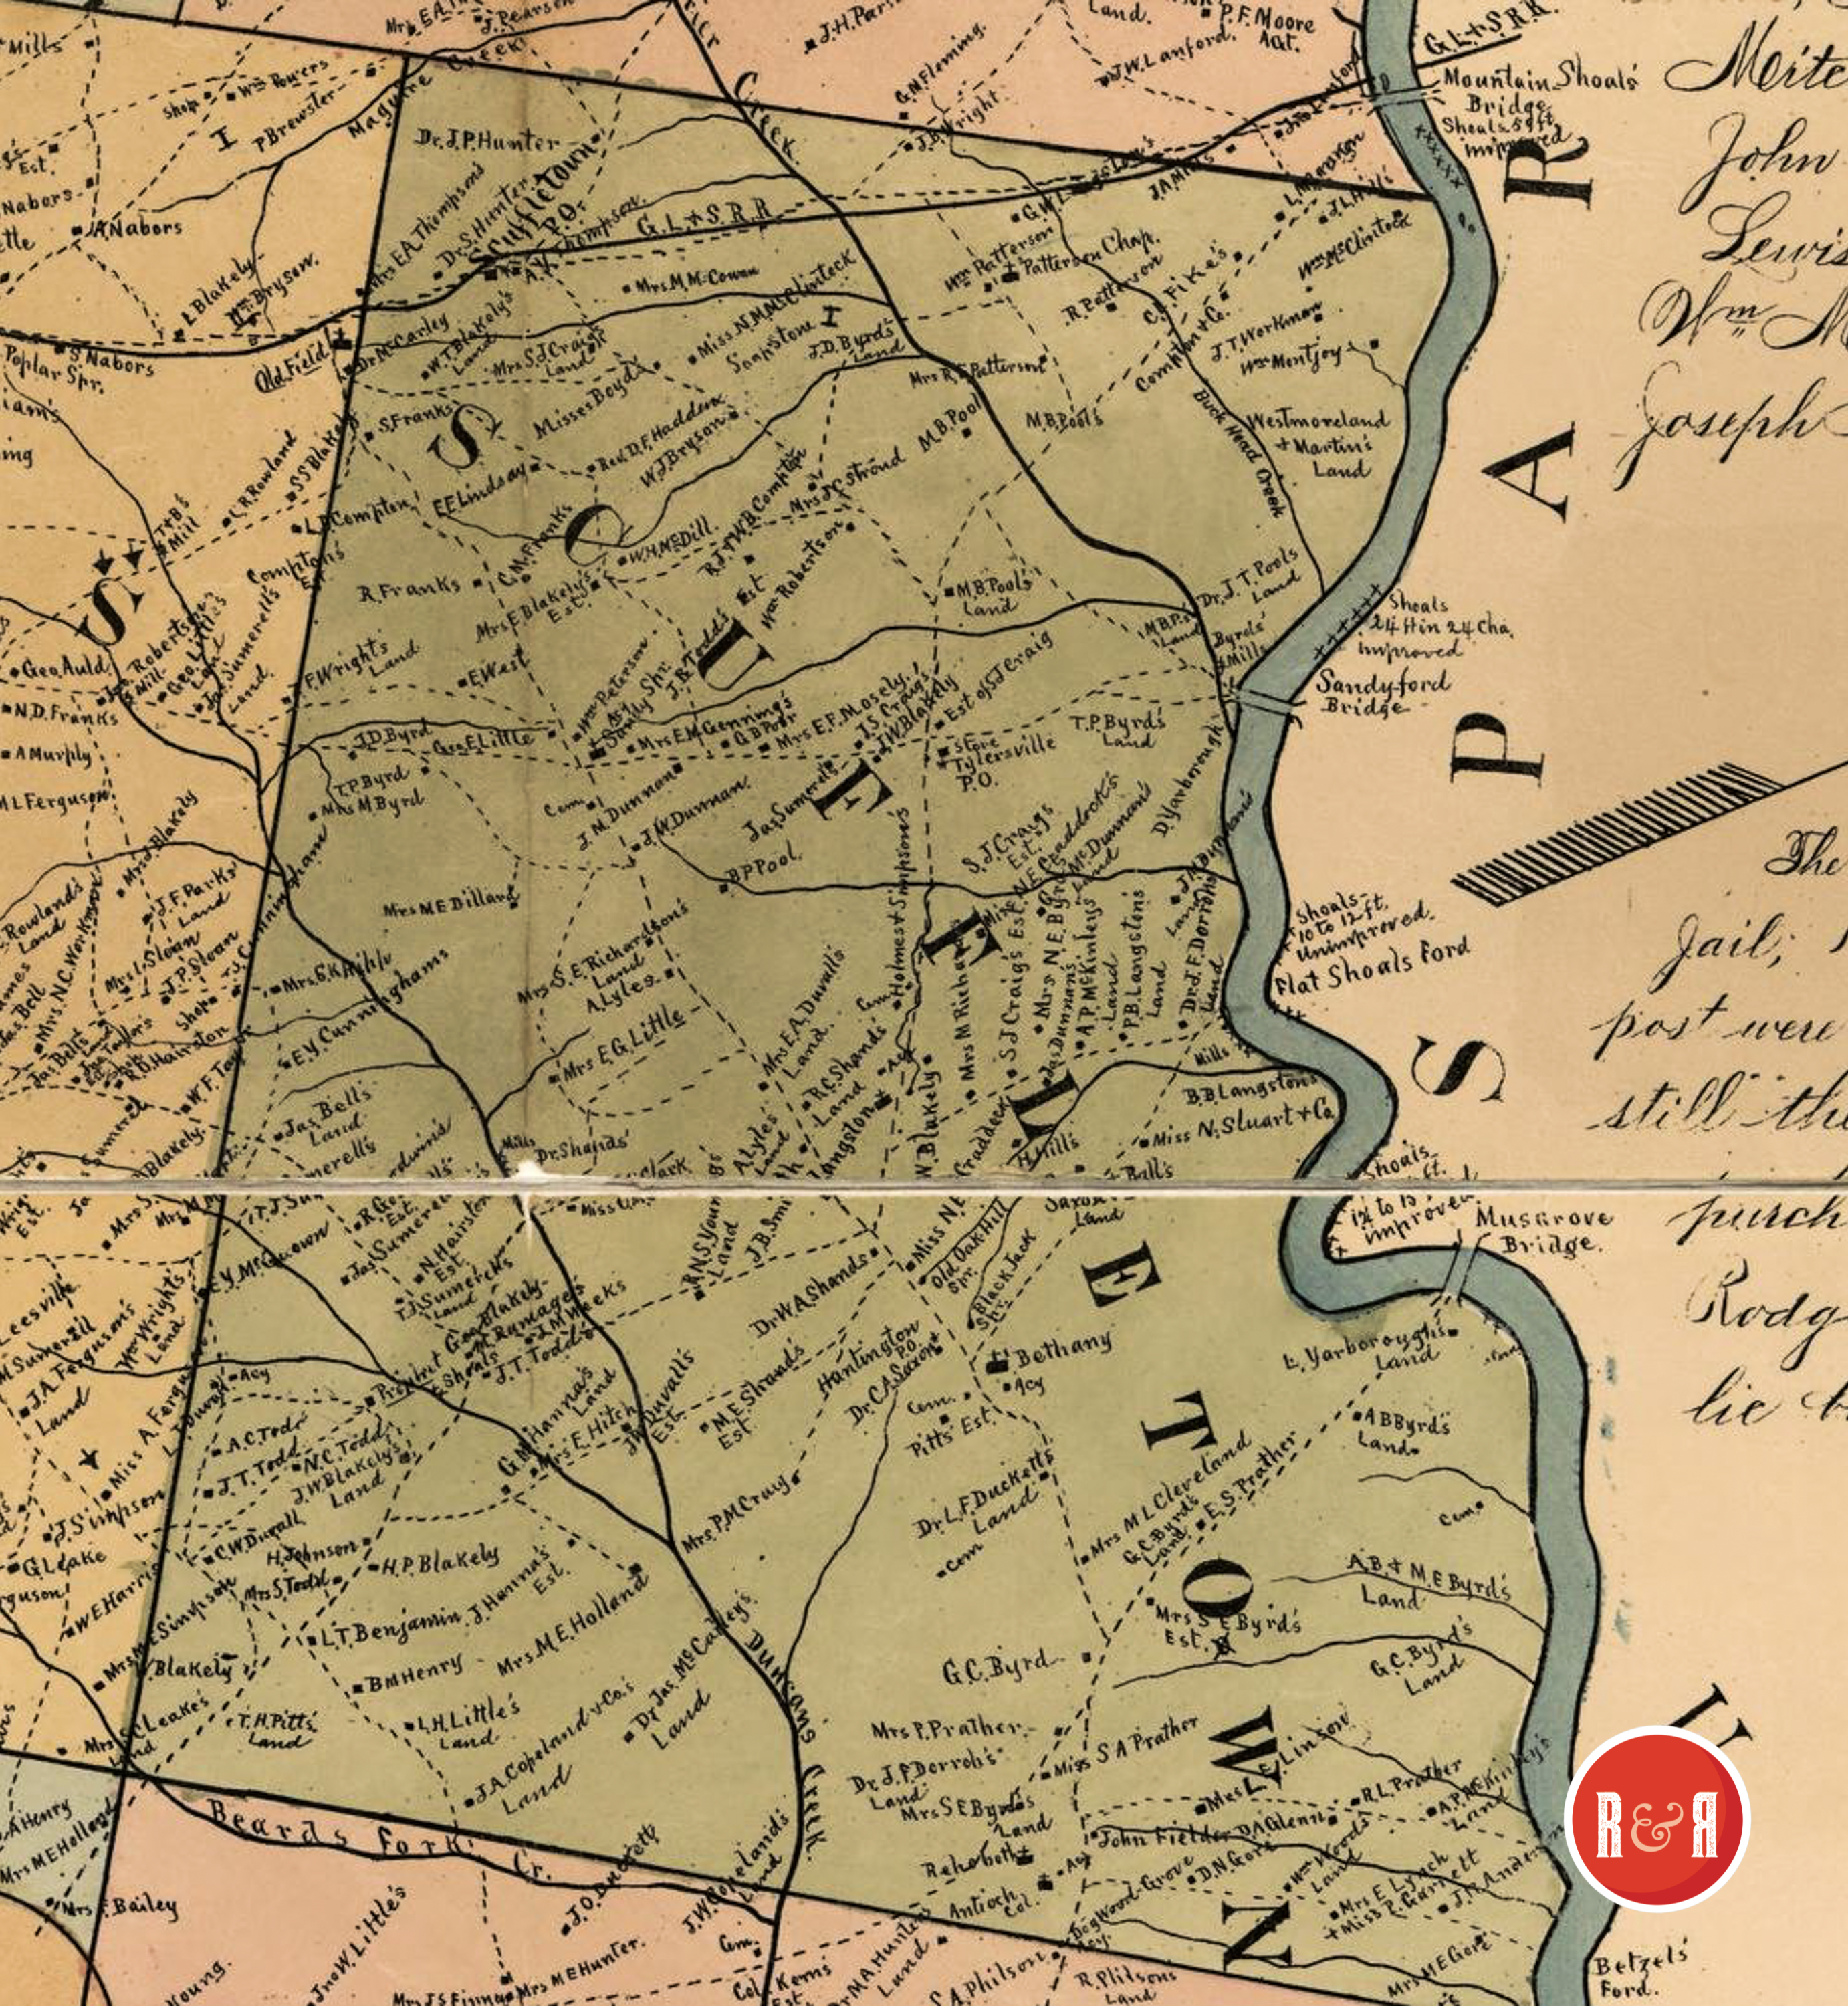 SCUFFLETOWN TOWNSHIP MAP - ENLARGED